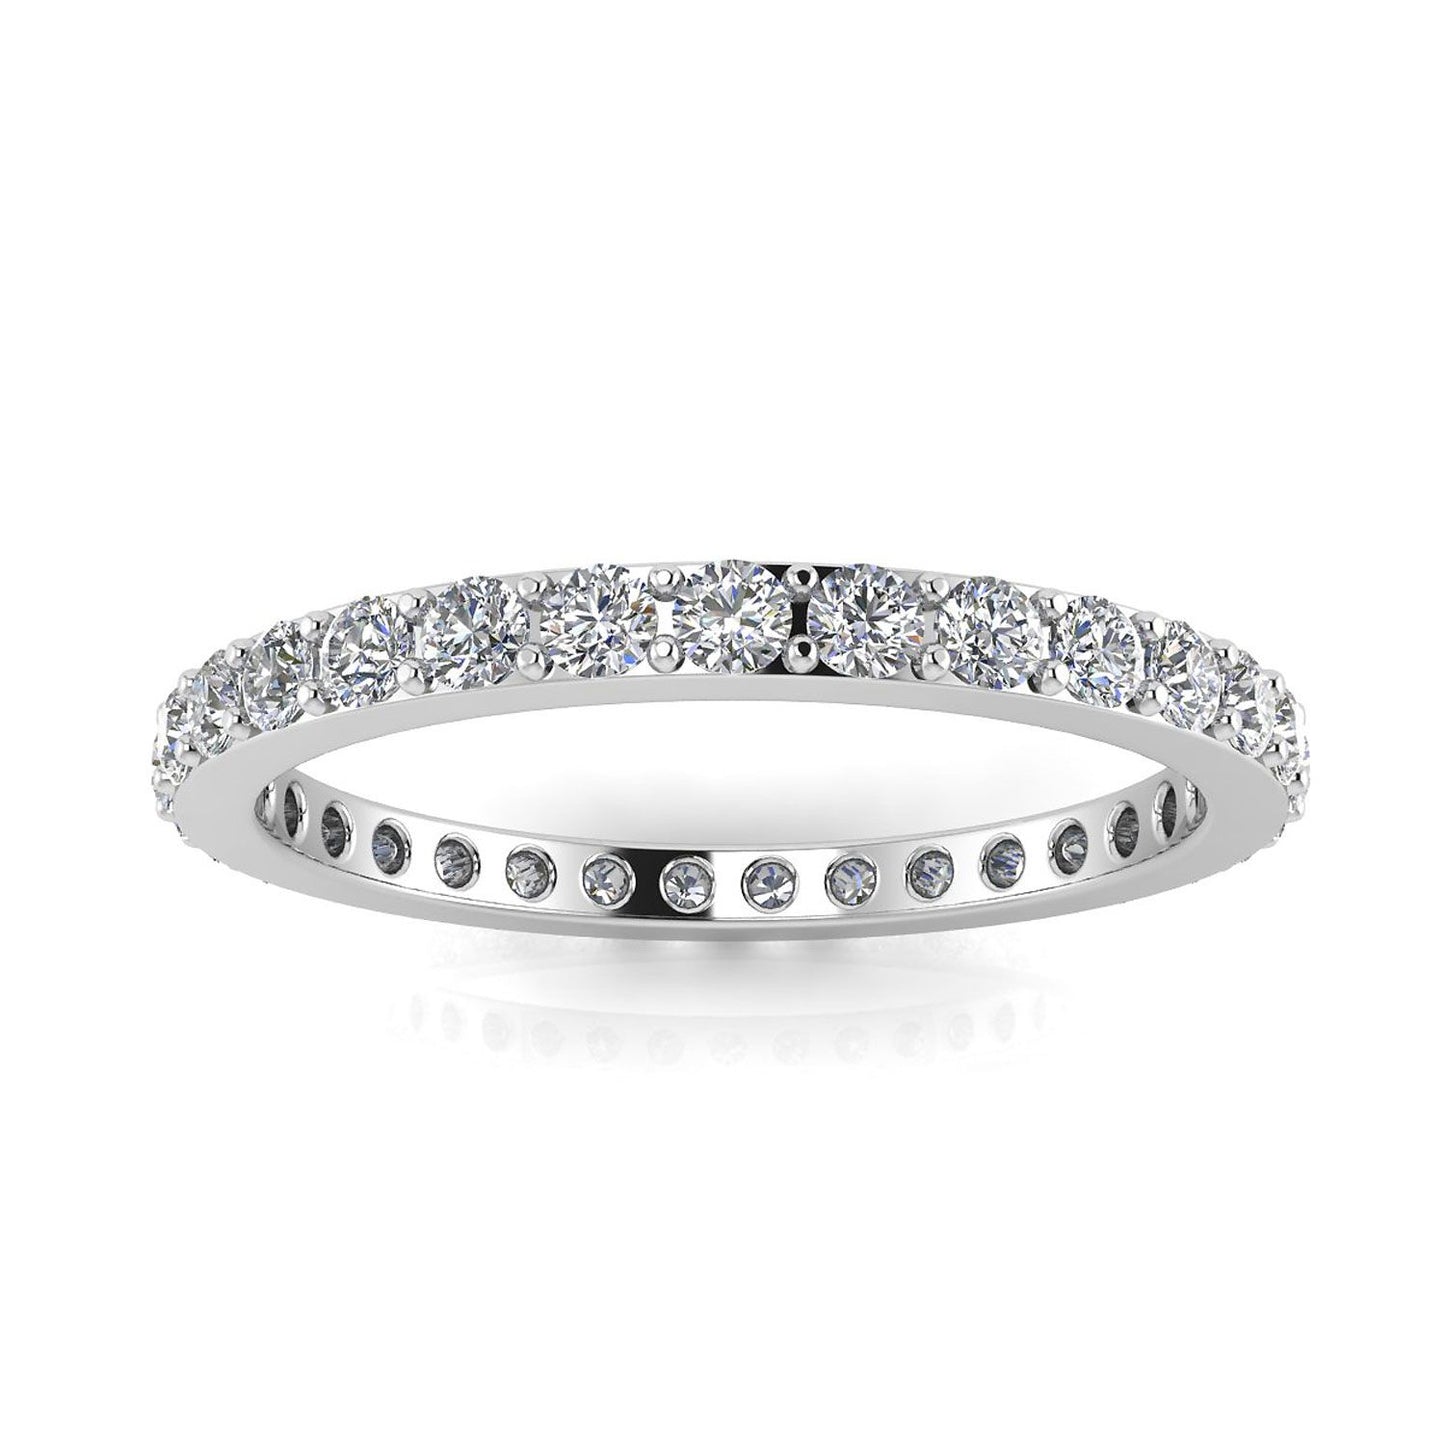 Round Brilliant Cut Diamond Pave Set Eternity Ring In 18k White Gold  (0.61ct. Tw.) Ring Size 4